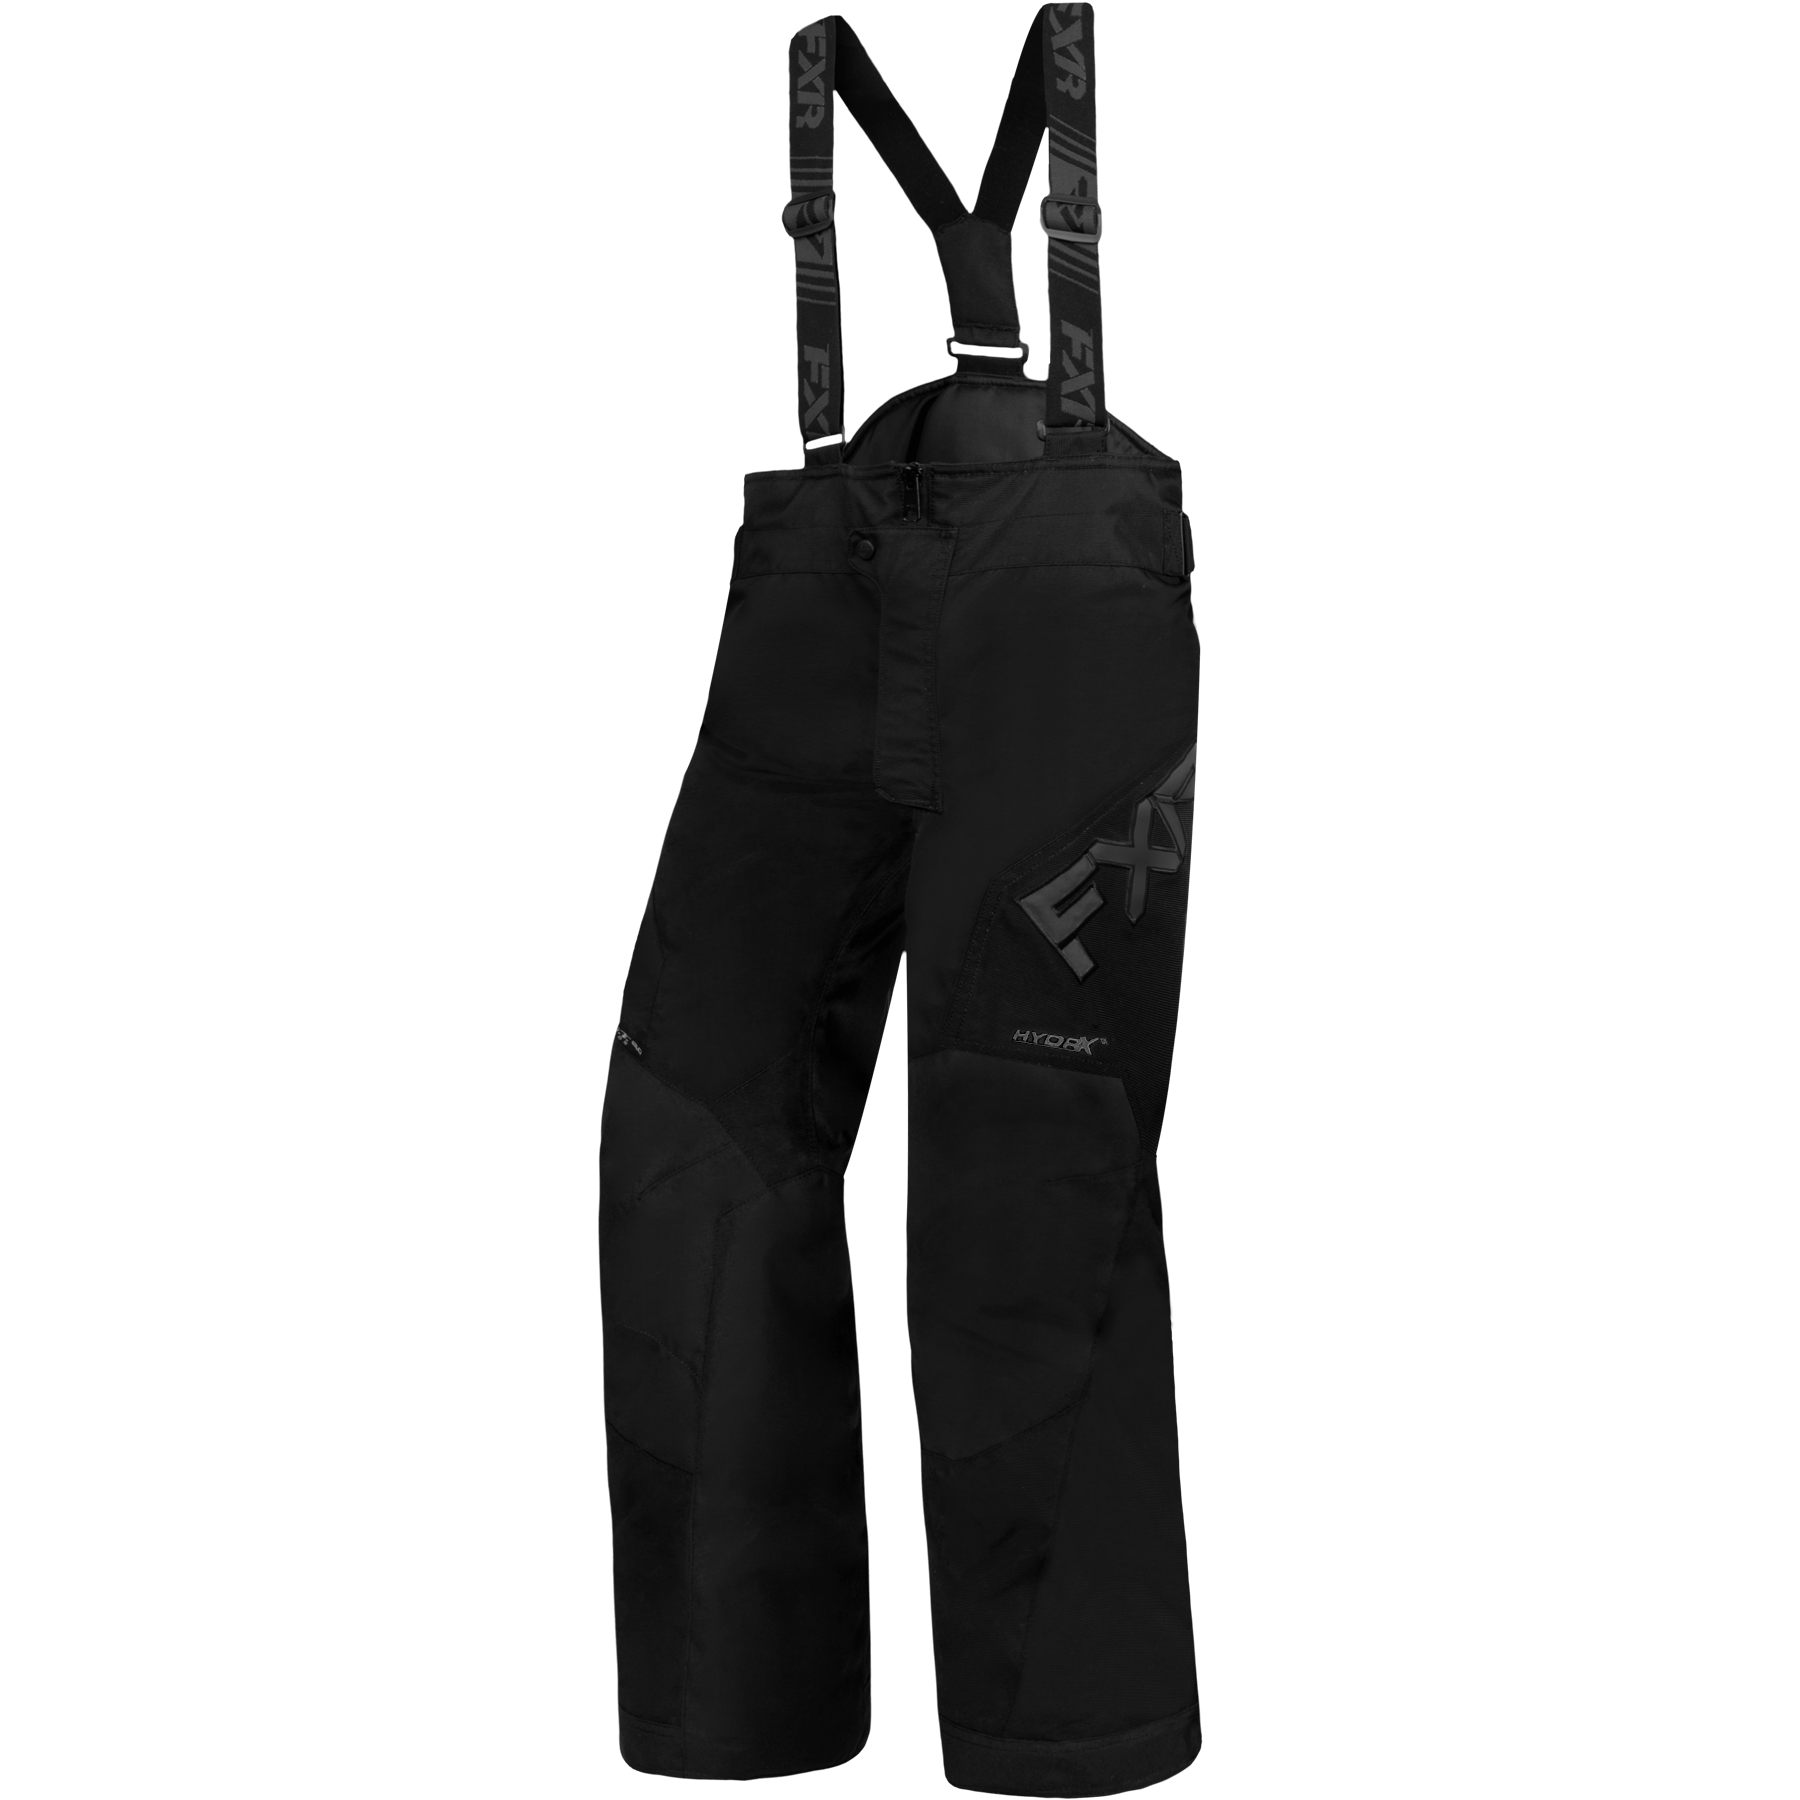 fxr racing insulated pants for kids clutch fast